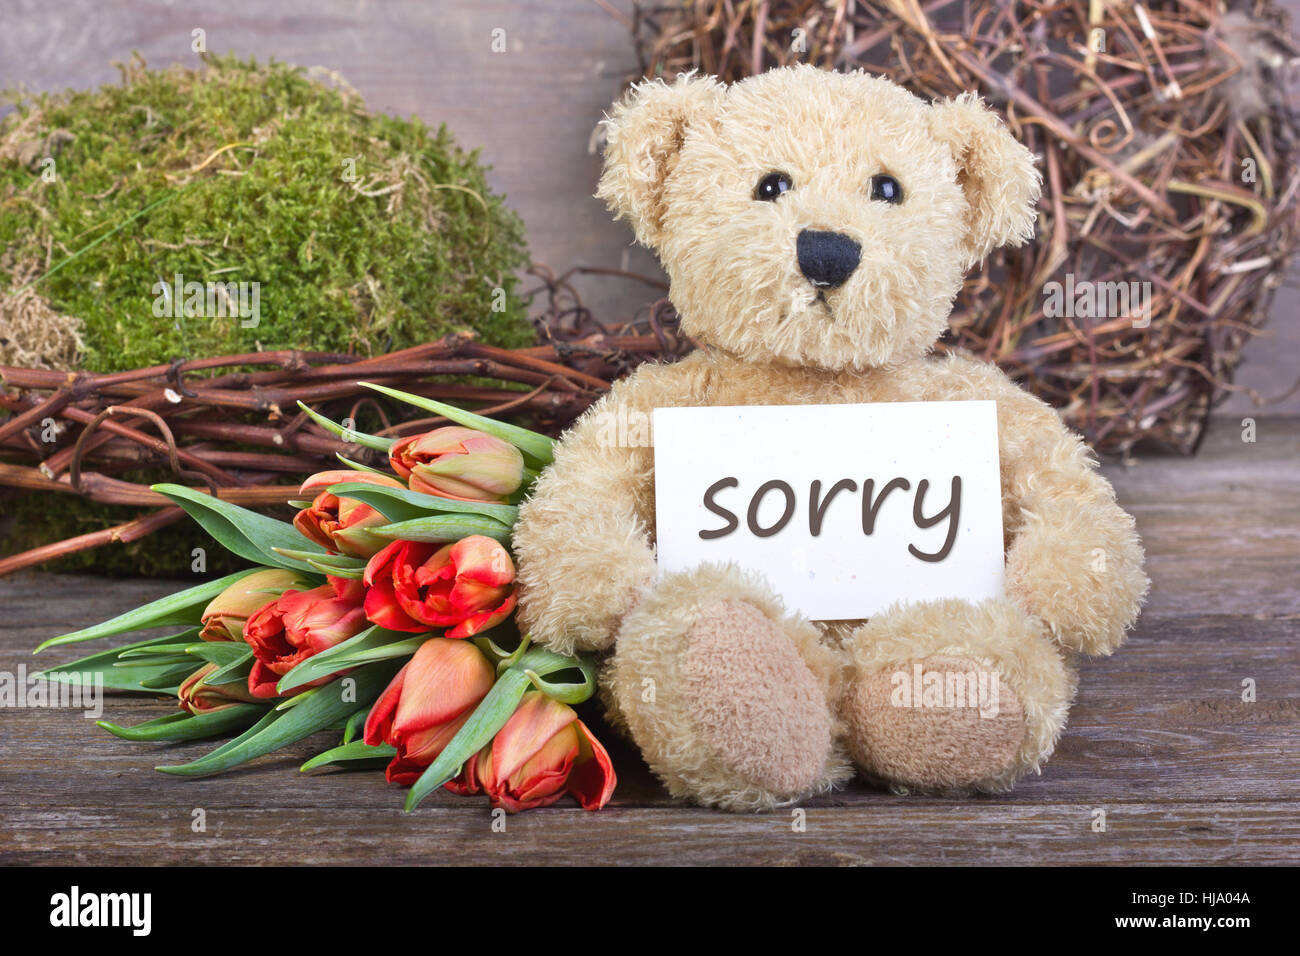 flower, flowers, plant, teddy, cuddly toy, excuse, apologize, letters, slip, Stock Photo